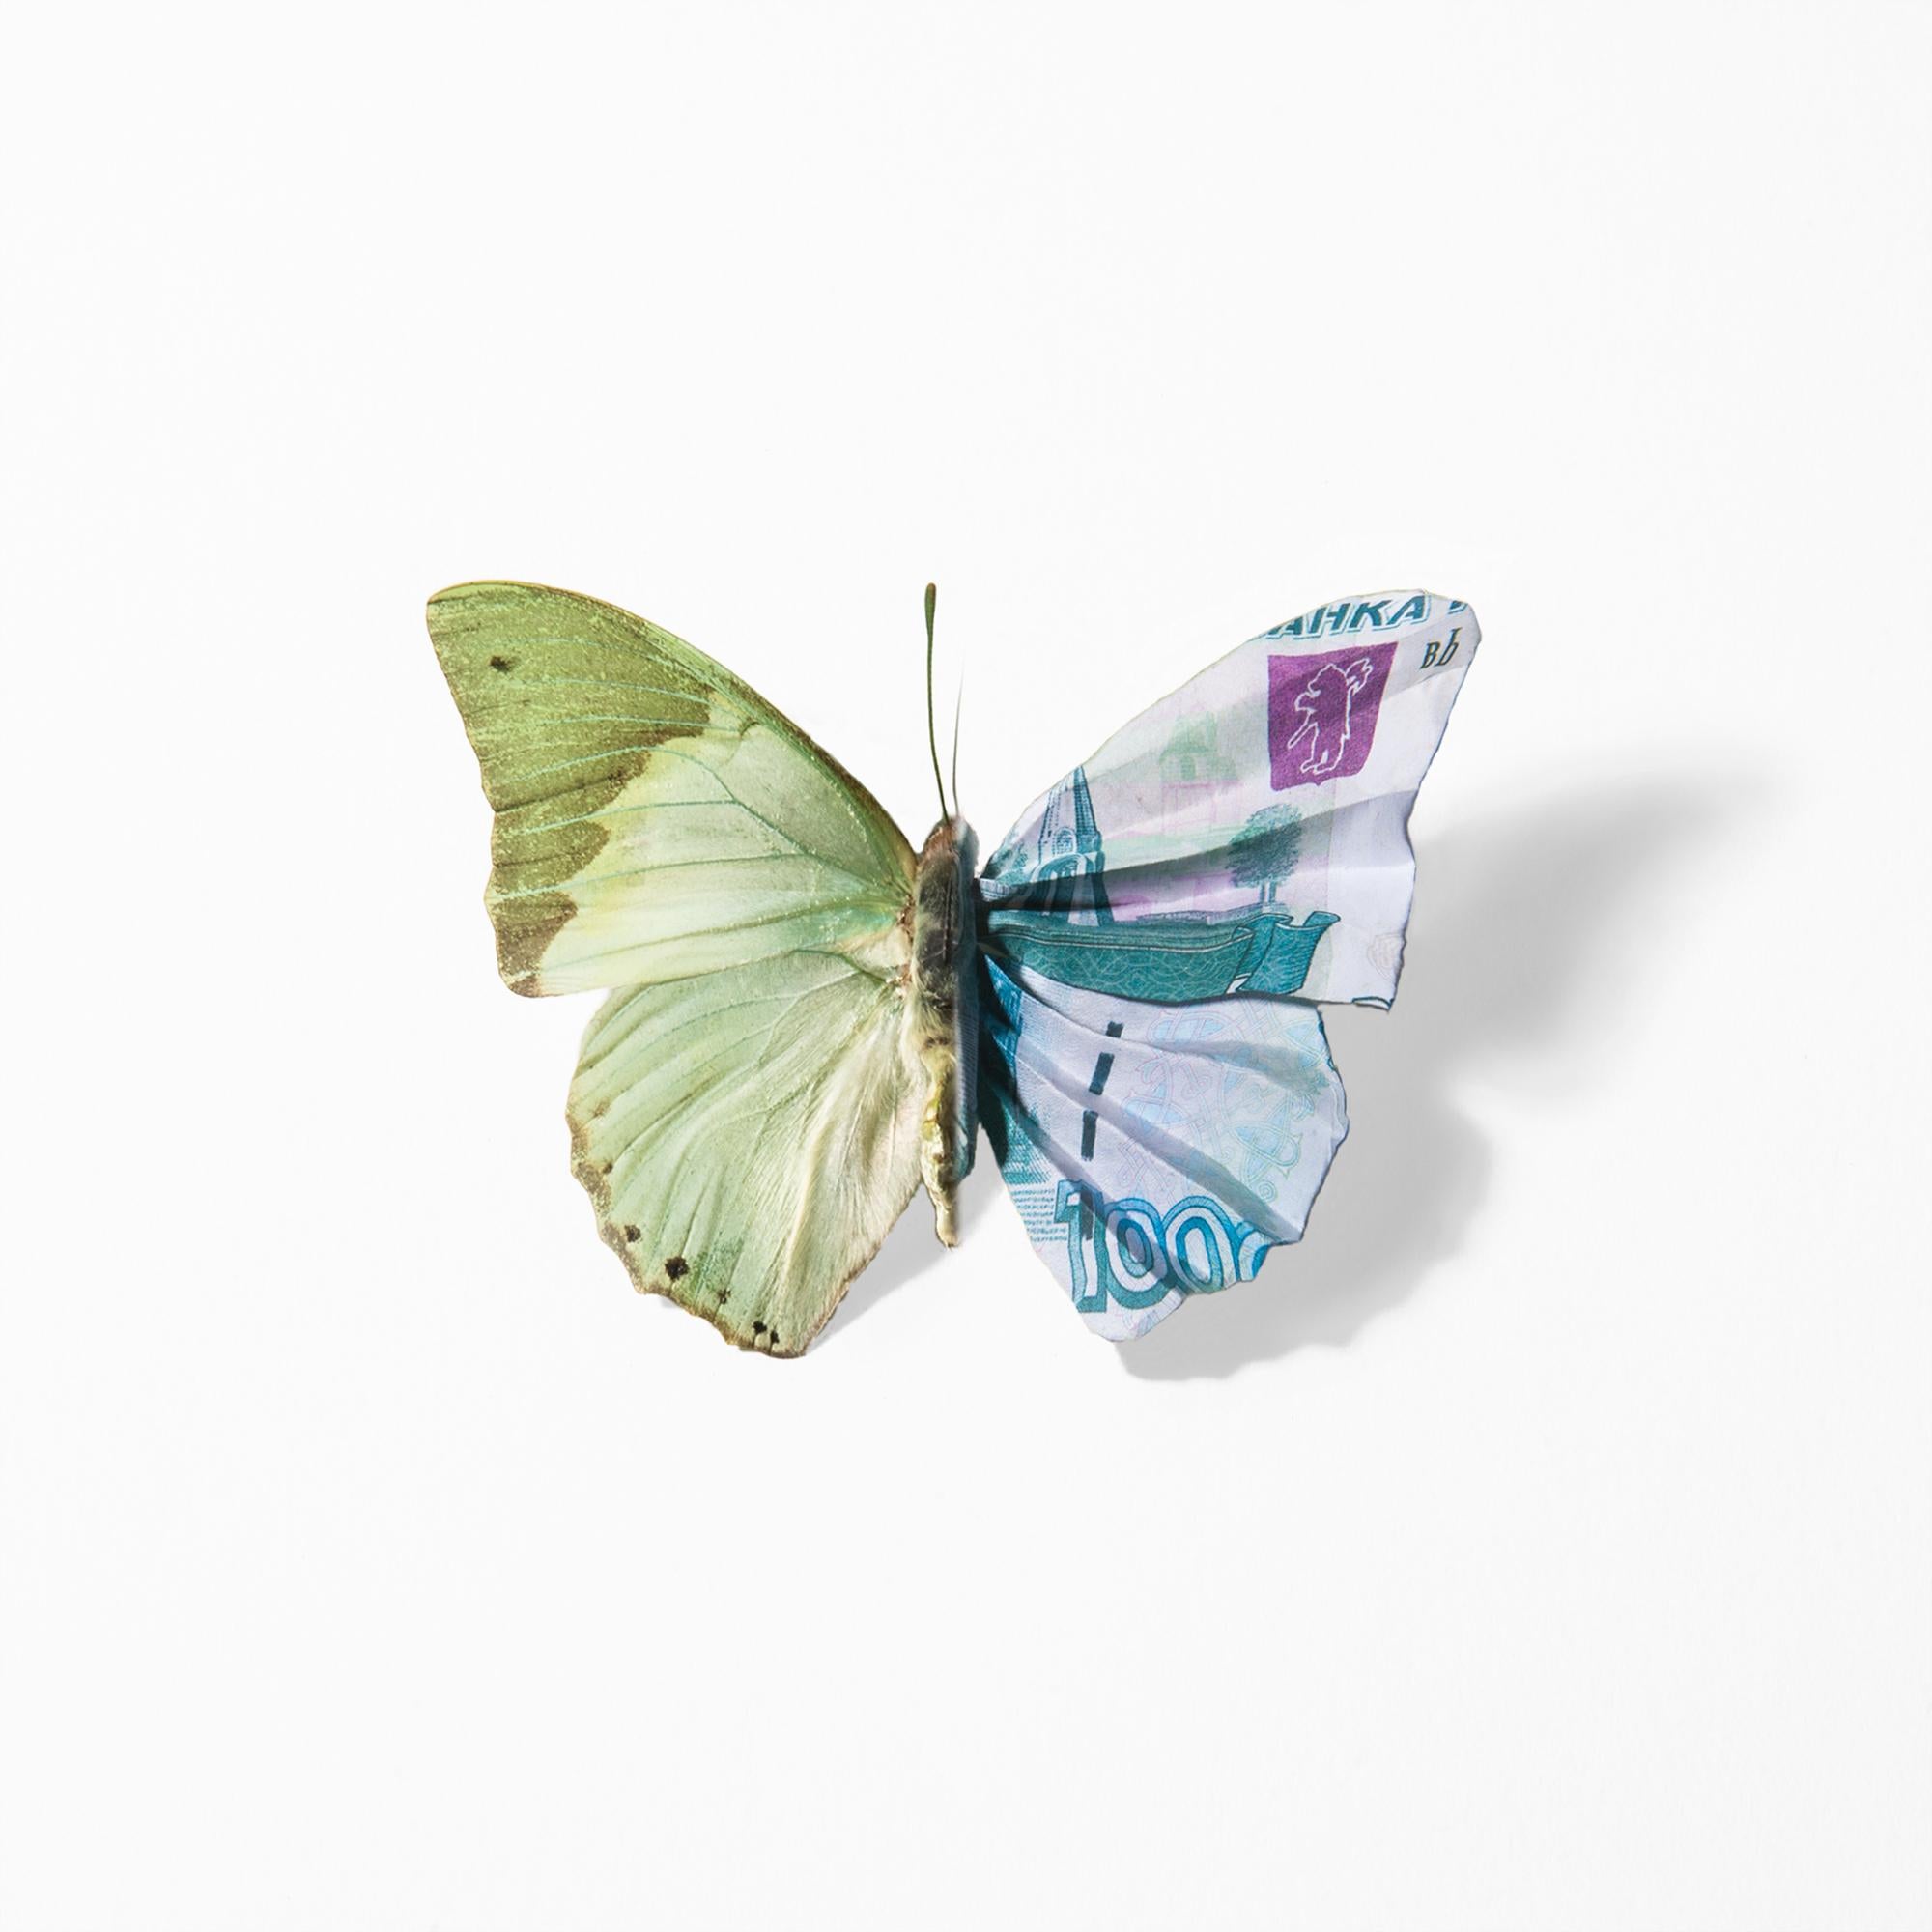 „A Thing of Beauty #7 (Charaxes)“ Lentikularübergang Schmetterling zu Currency